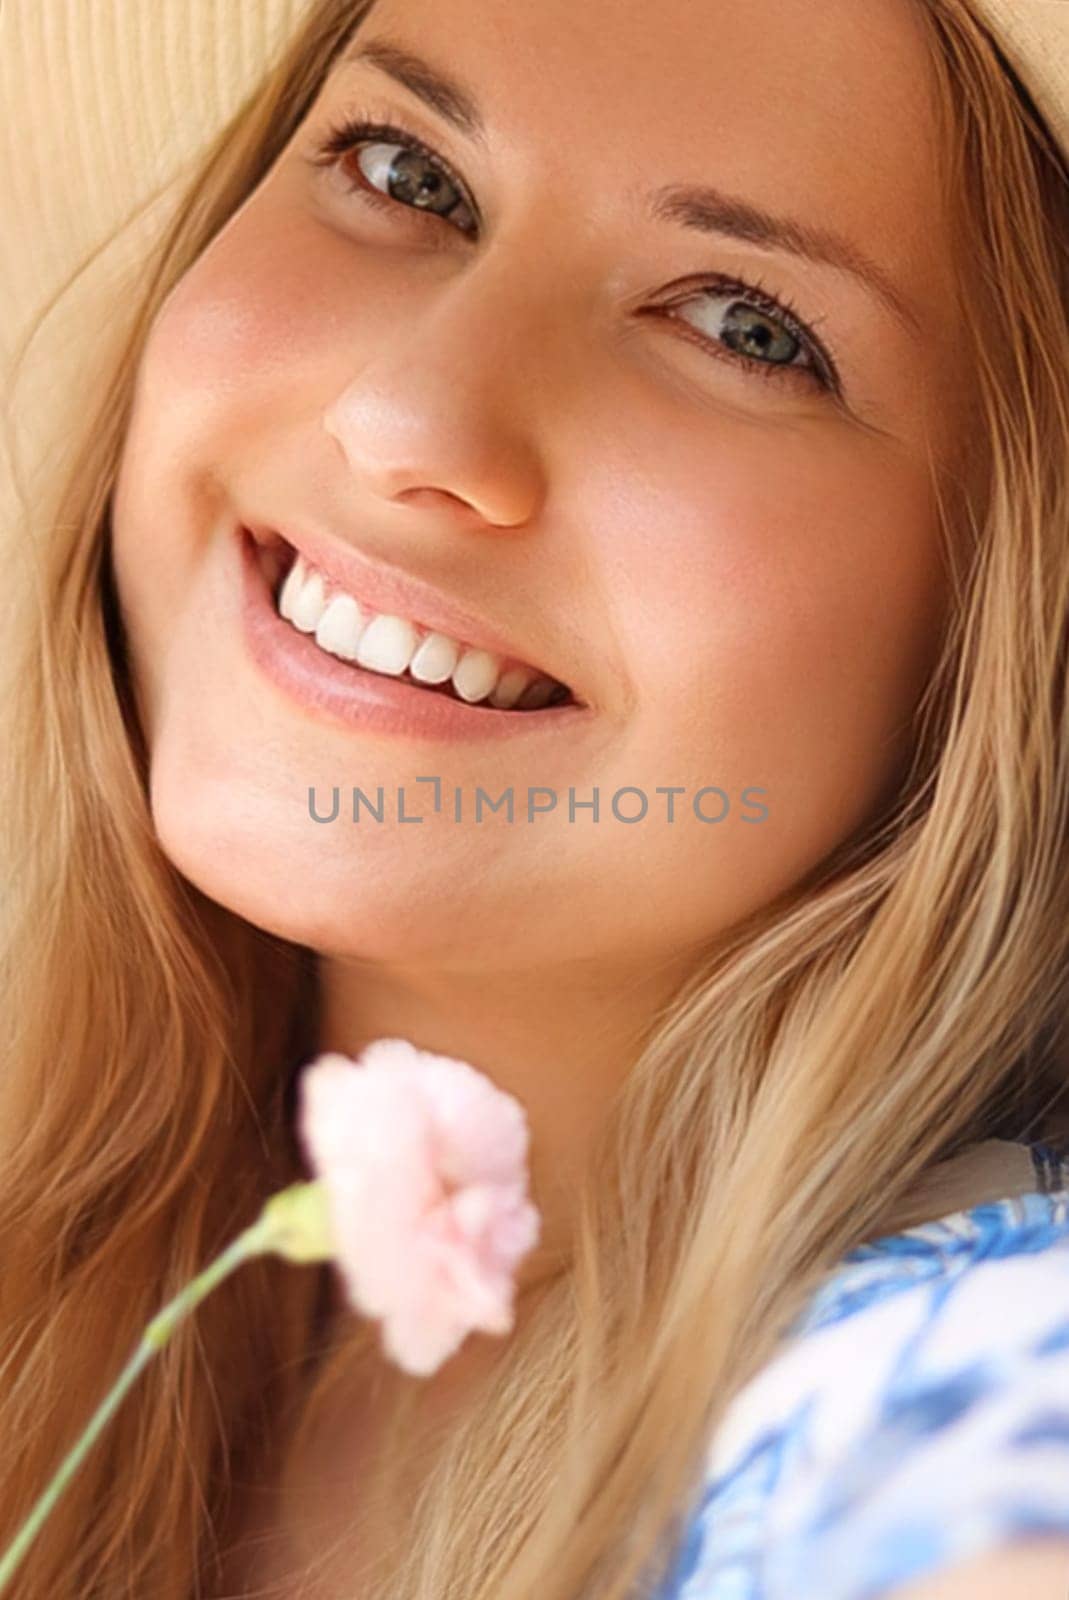 Beauty, summer and skincare, happy smiling woman in hat with flower as cosmetics, wellness and lifestyle fashion by Anneleven